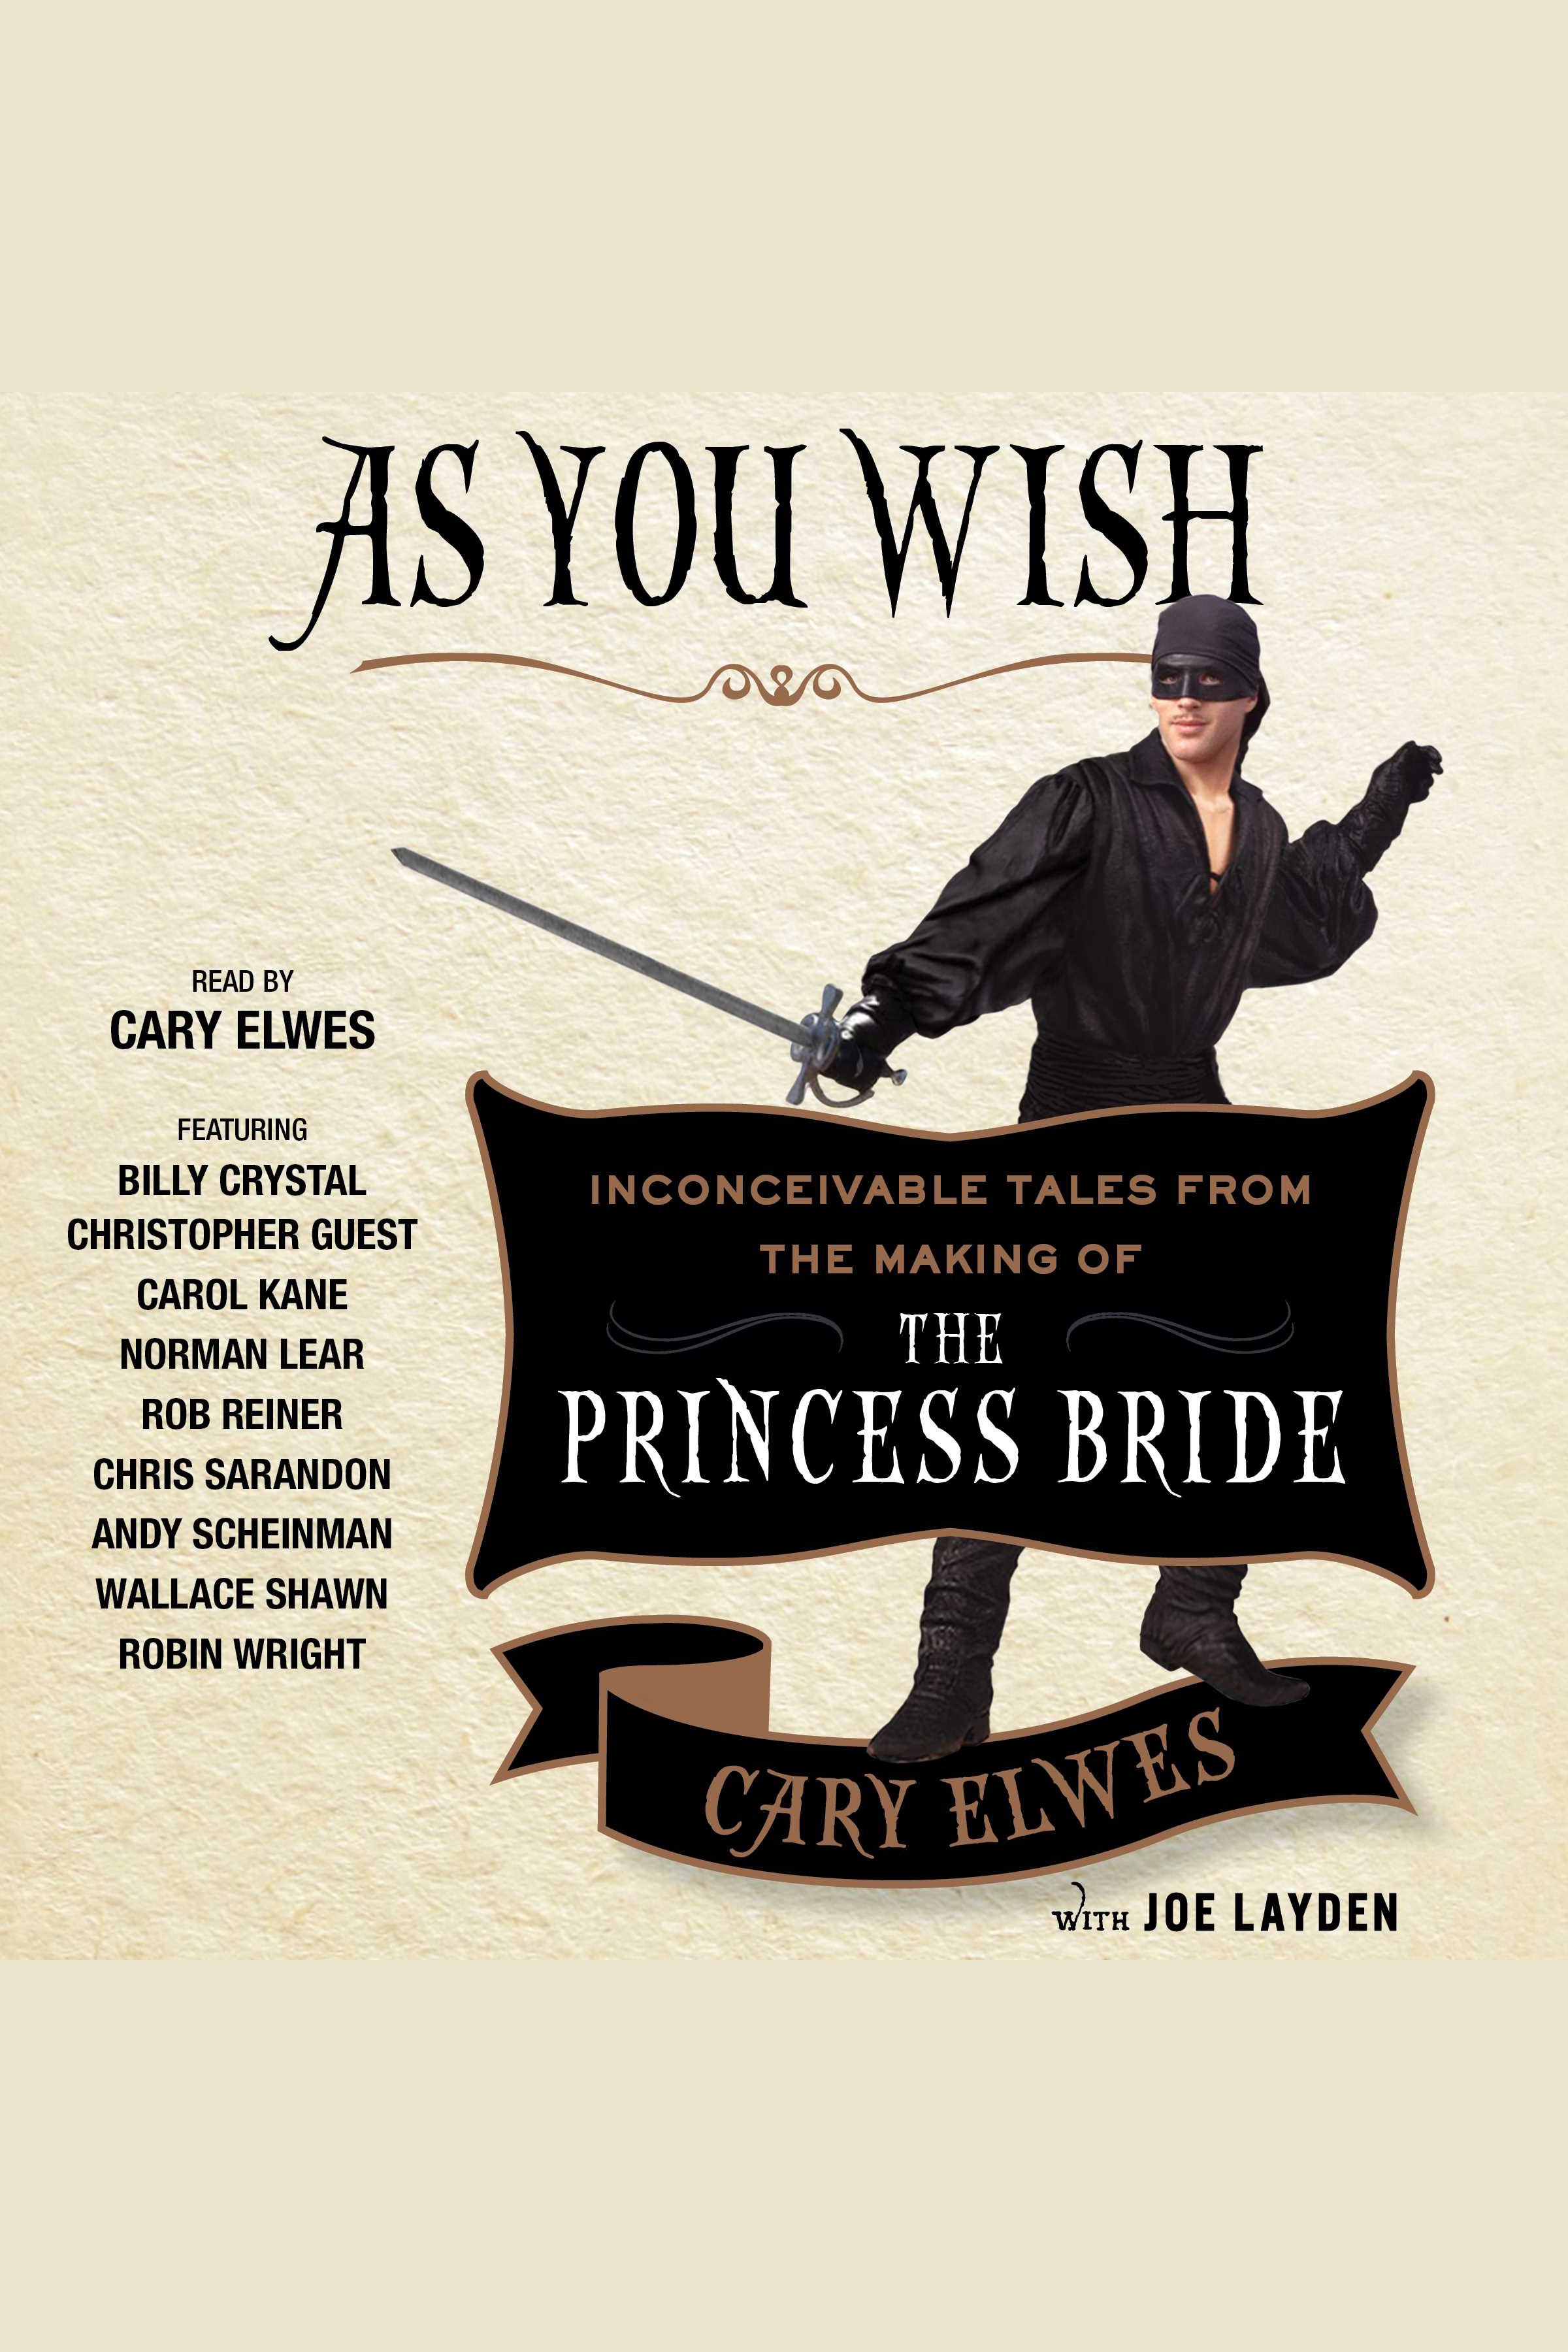 As you wish inconceivable tales from the making of the Princess Bride cover image